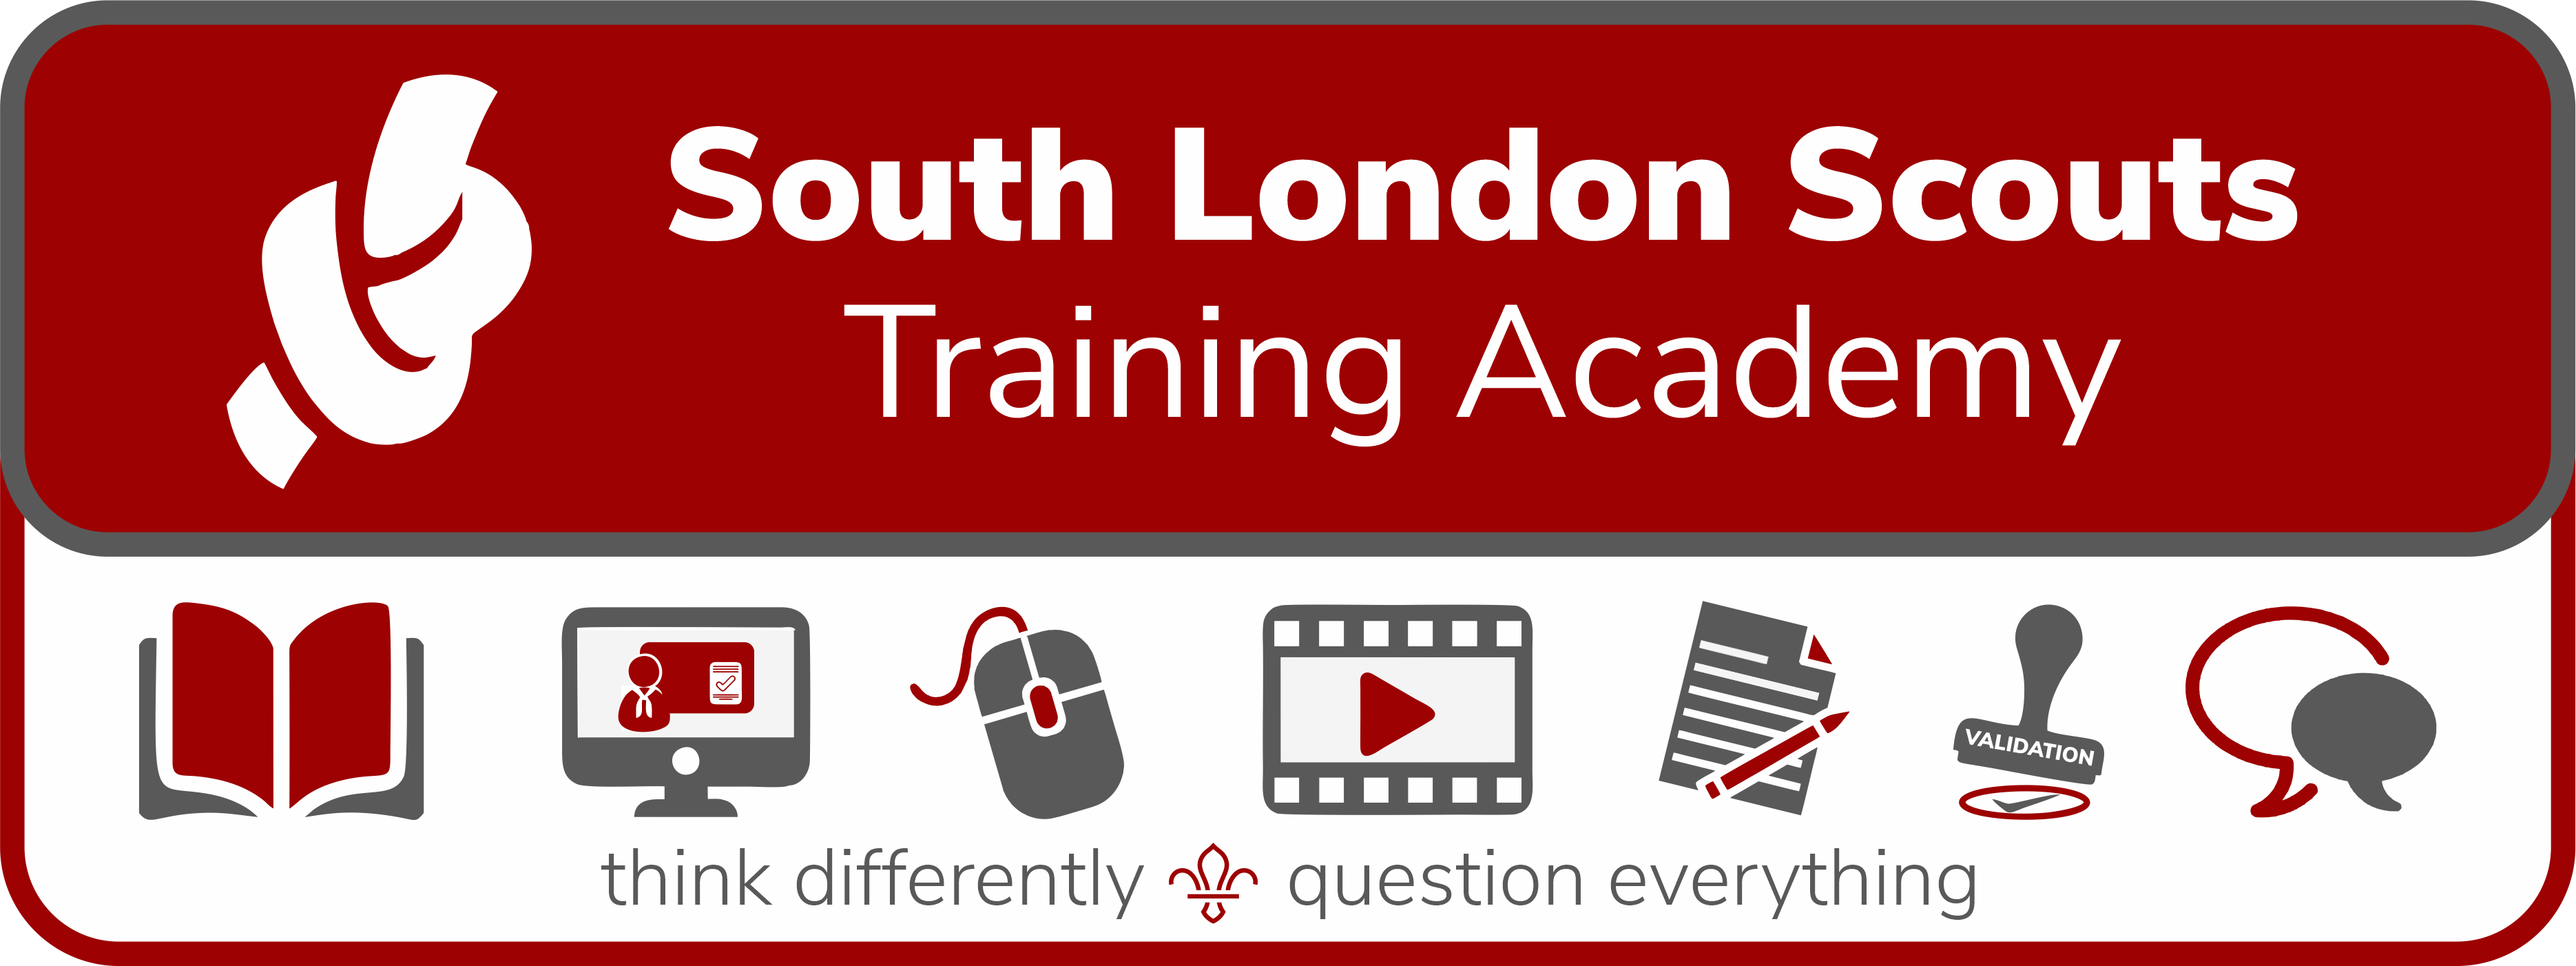 South London Scout Training Academy